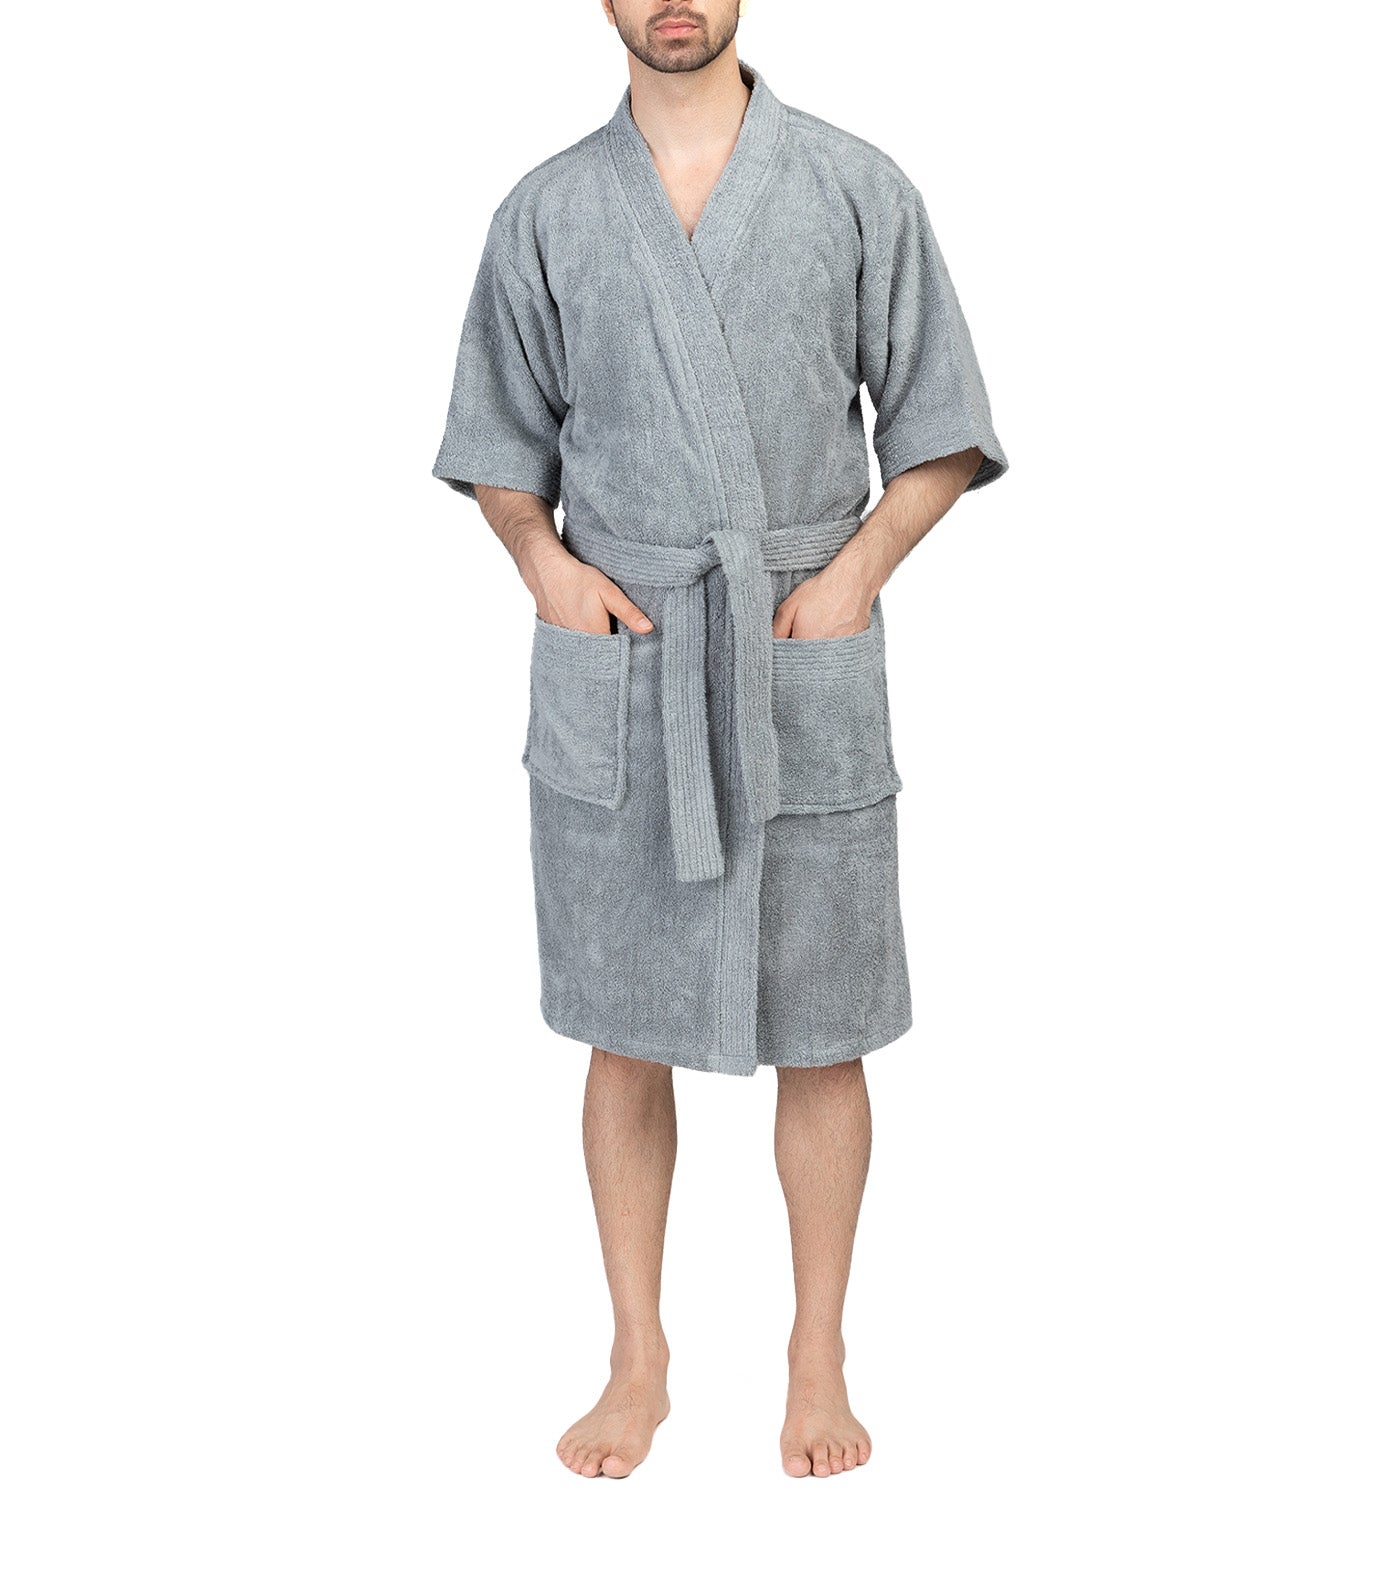 Terry Robe for Male - Slate Gray